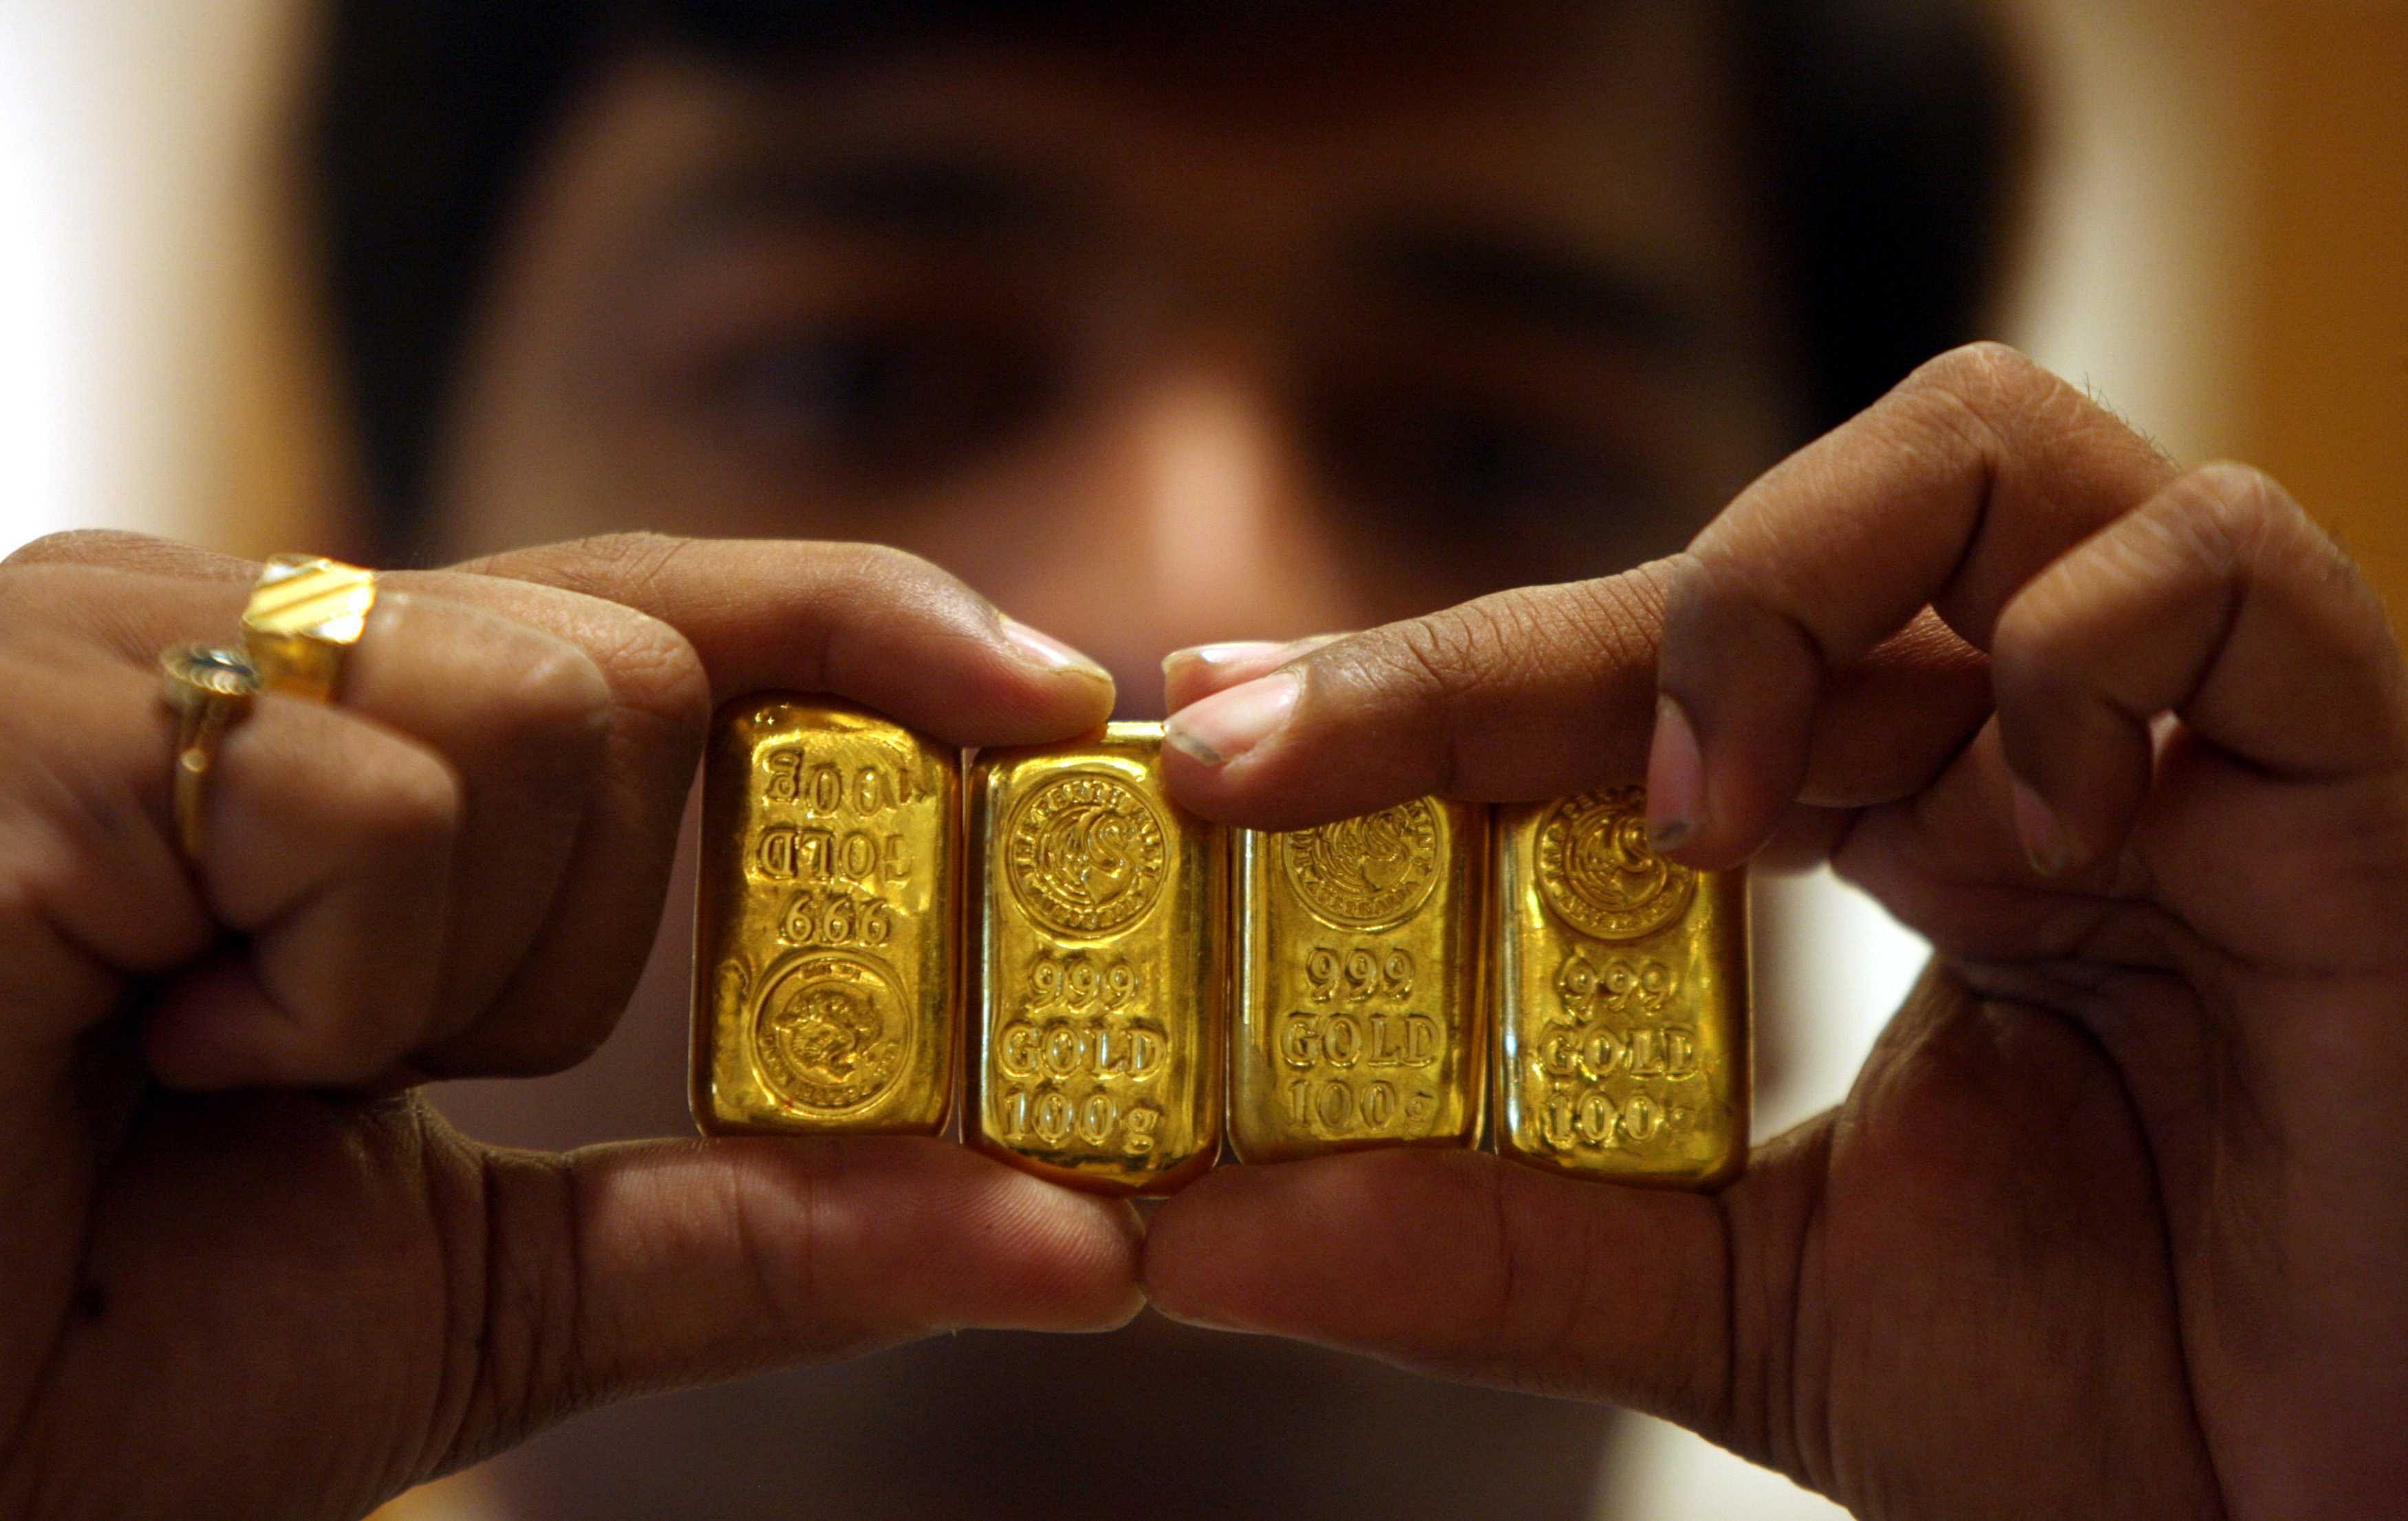 Globally, the demand for gold as an investment class remains robust. (Reuters photo)